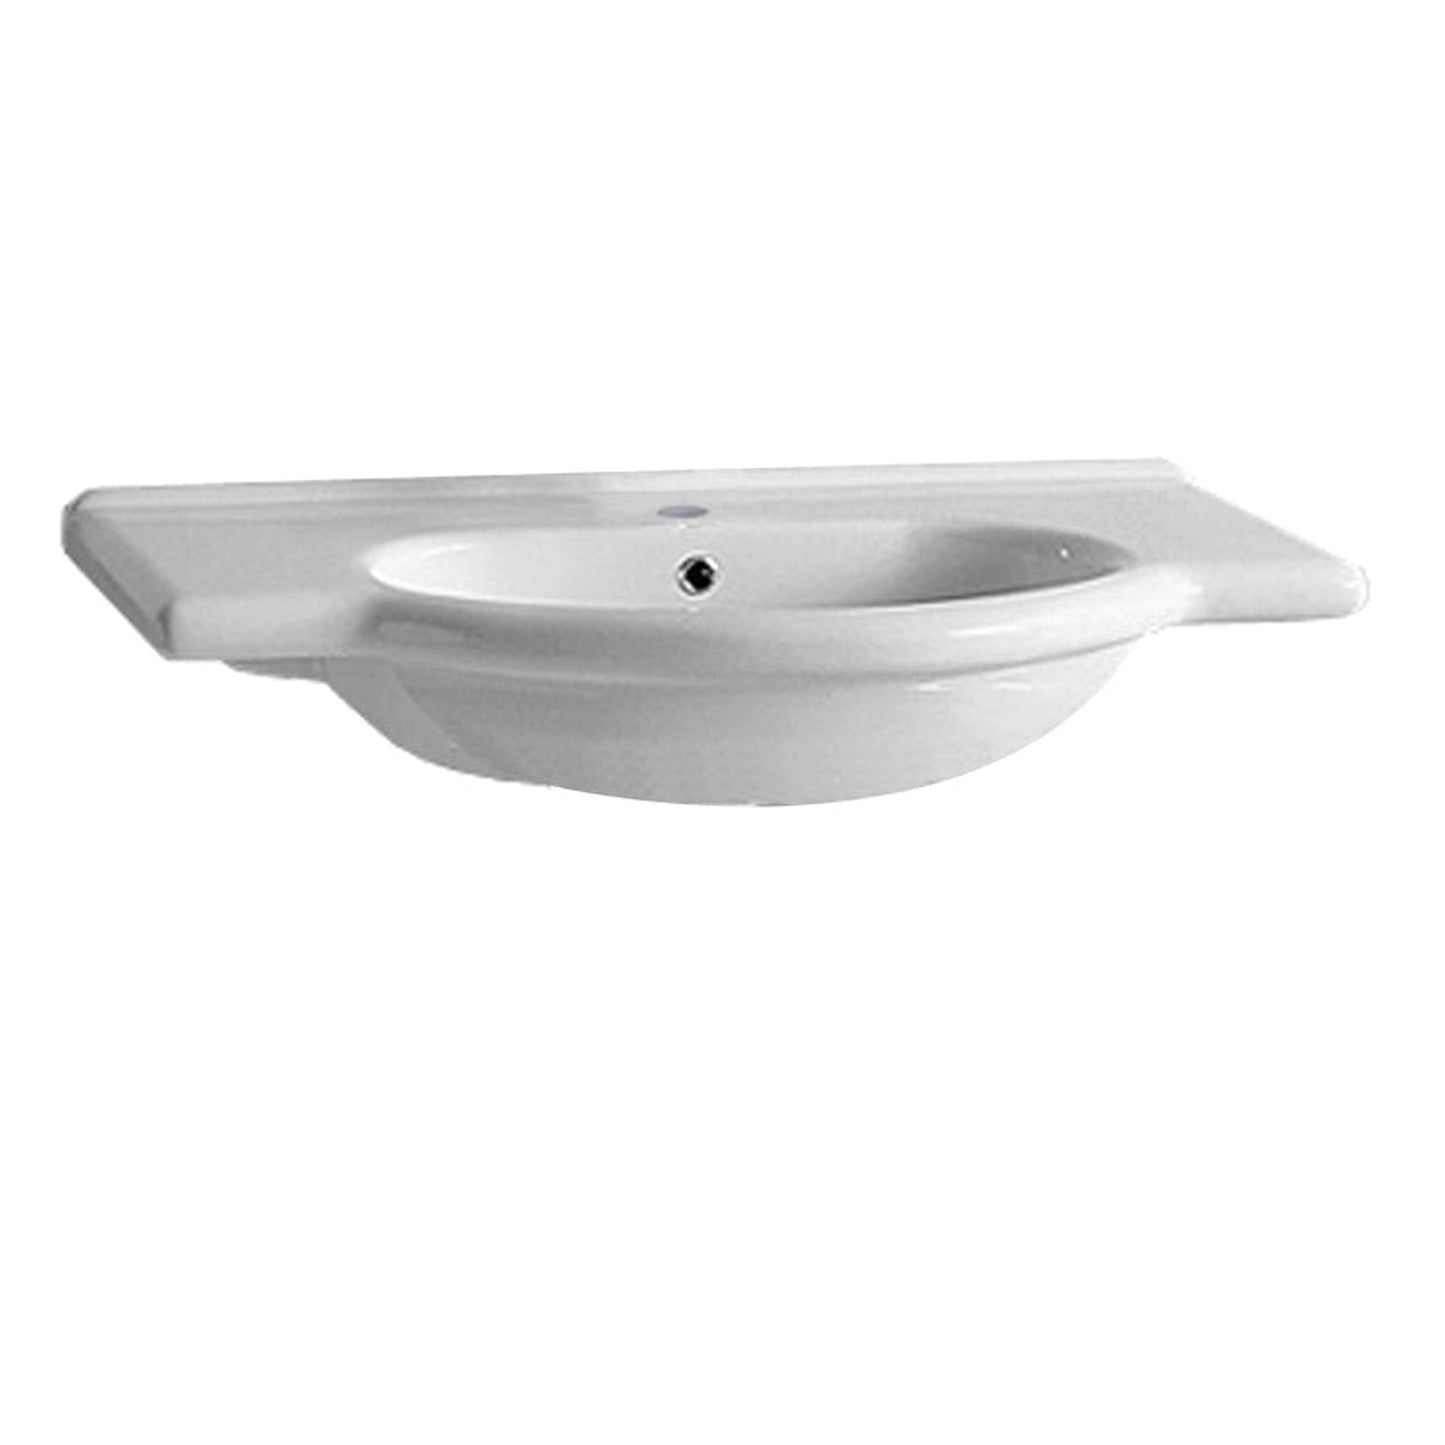 Whitehaus Isabella TOP62-1H White Wall Mount/Semi Recessed Large Vanity Bath Basin With Single Hole Faucet and Rear Center Drain